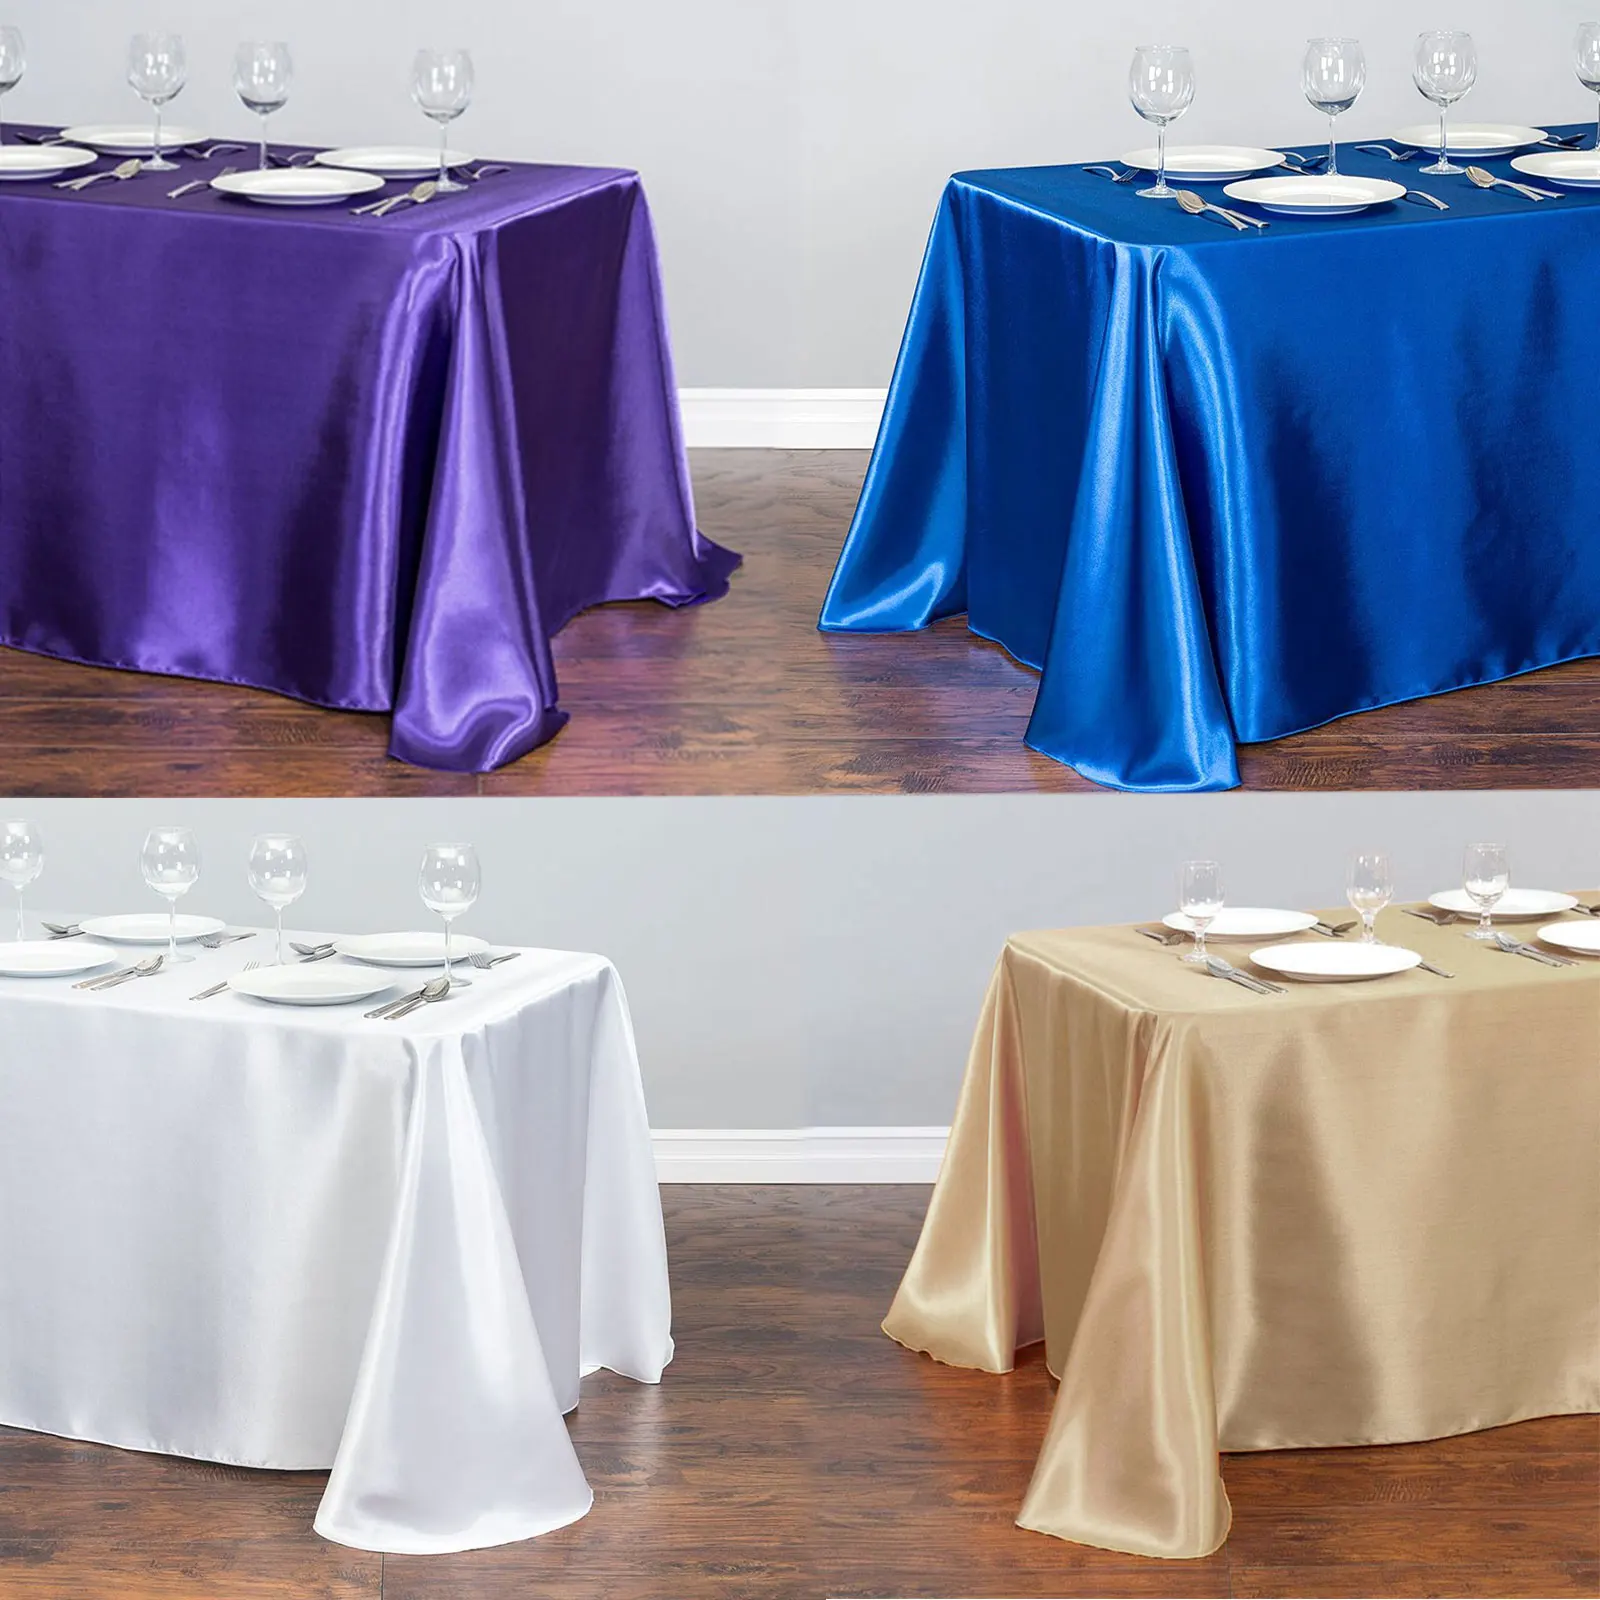 

1pcs Satin Table Cloth Table Topper Overlay Table Cover Tablecloth Birthday Wedding Banquet Hotel Festival Party Decoration Hot